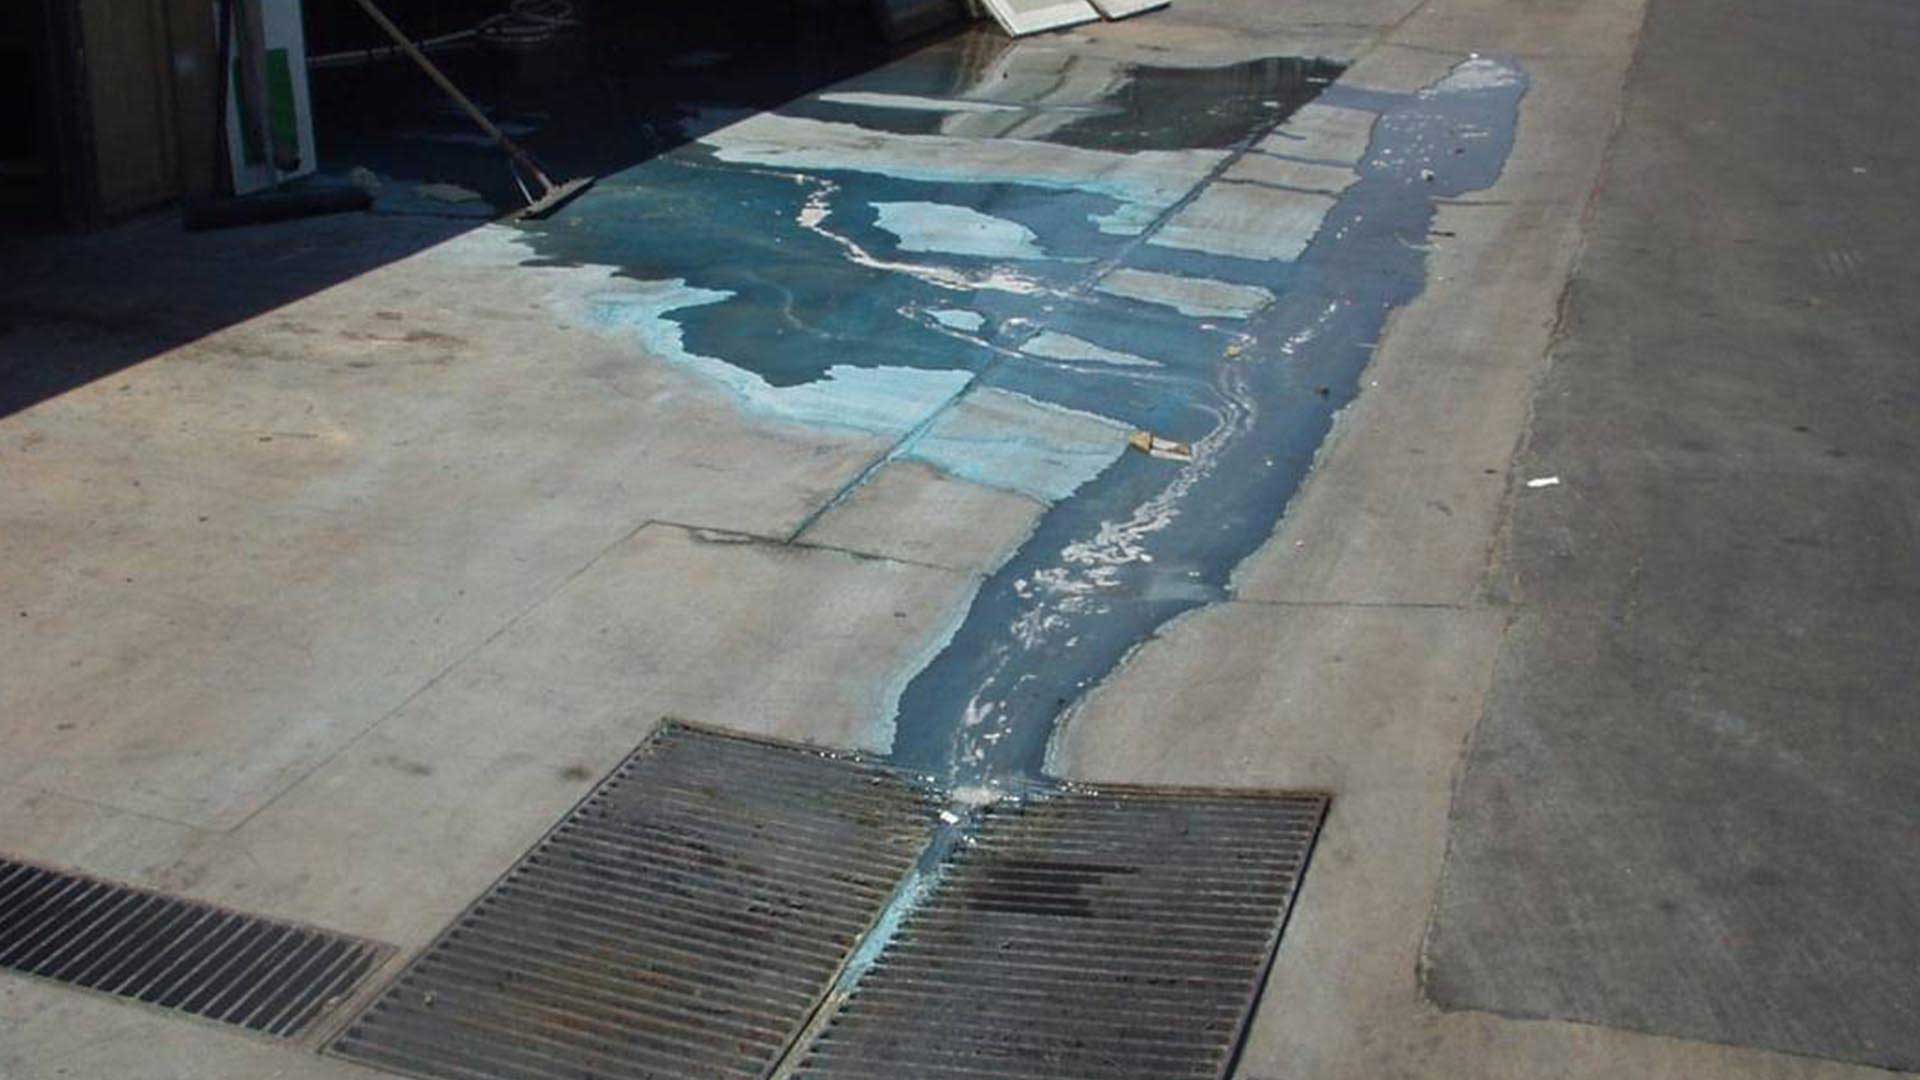 chemical waste flowing into drain